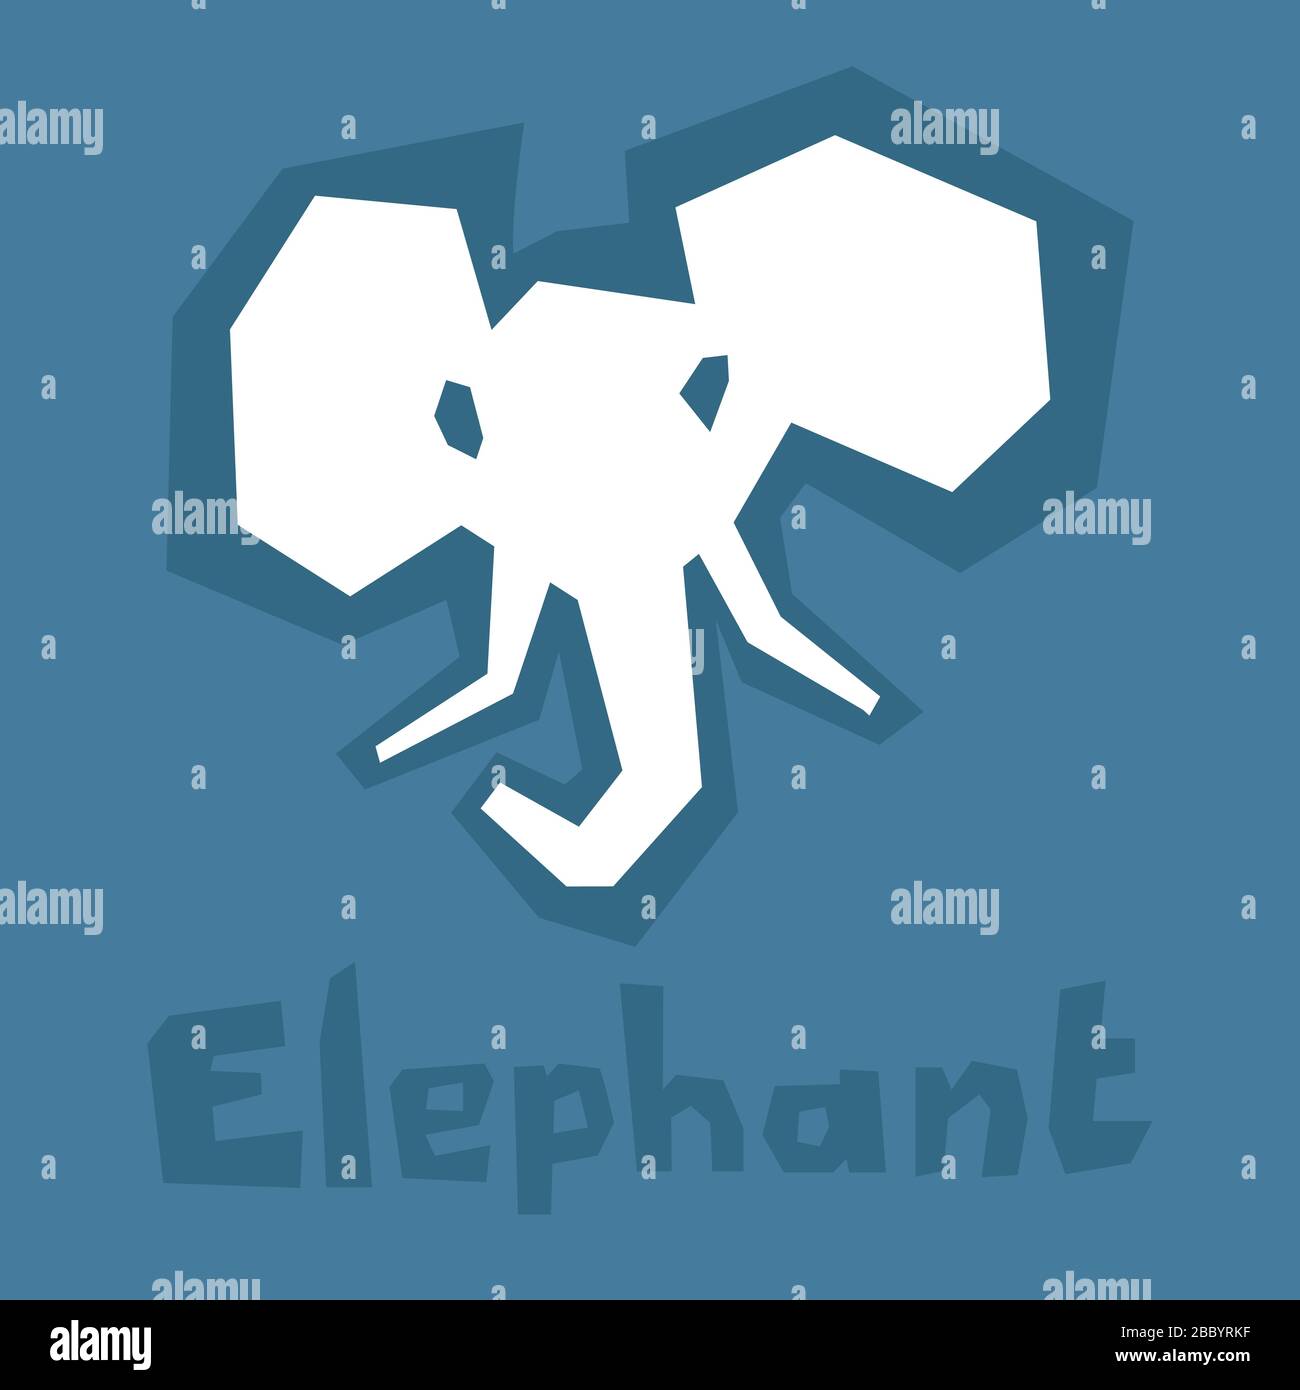 Elephant icon, paper cut. Brutal modern style. Abstract silhouette on a blue background with text. Interactive card for learning English alphabet Stock Vector